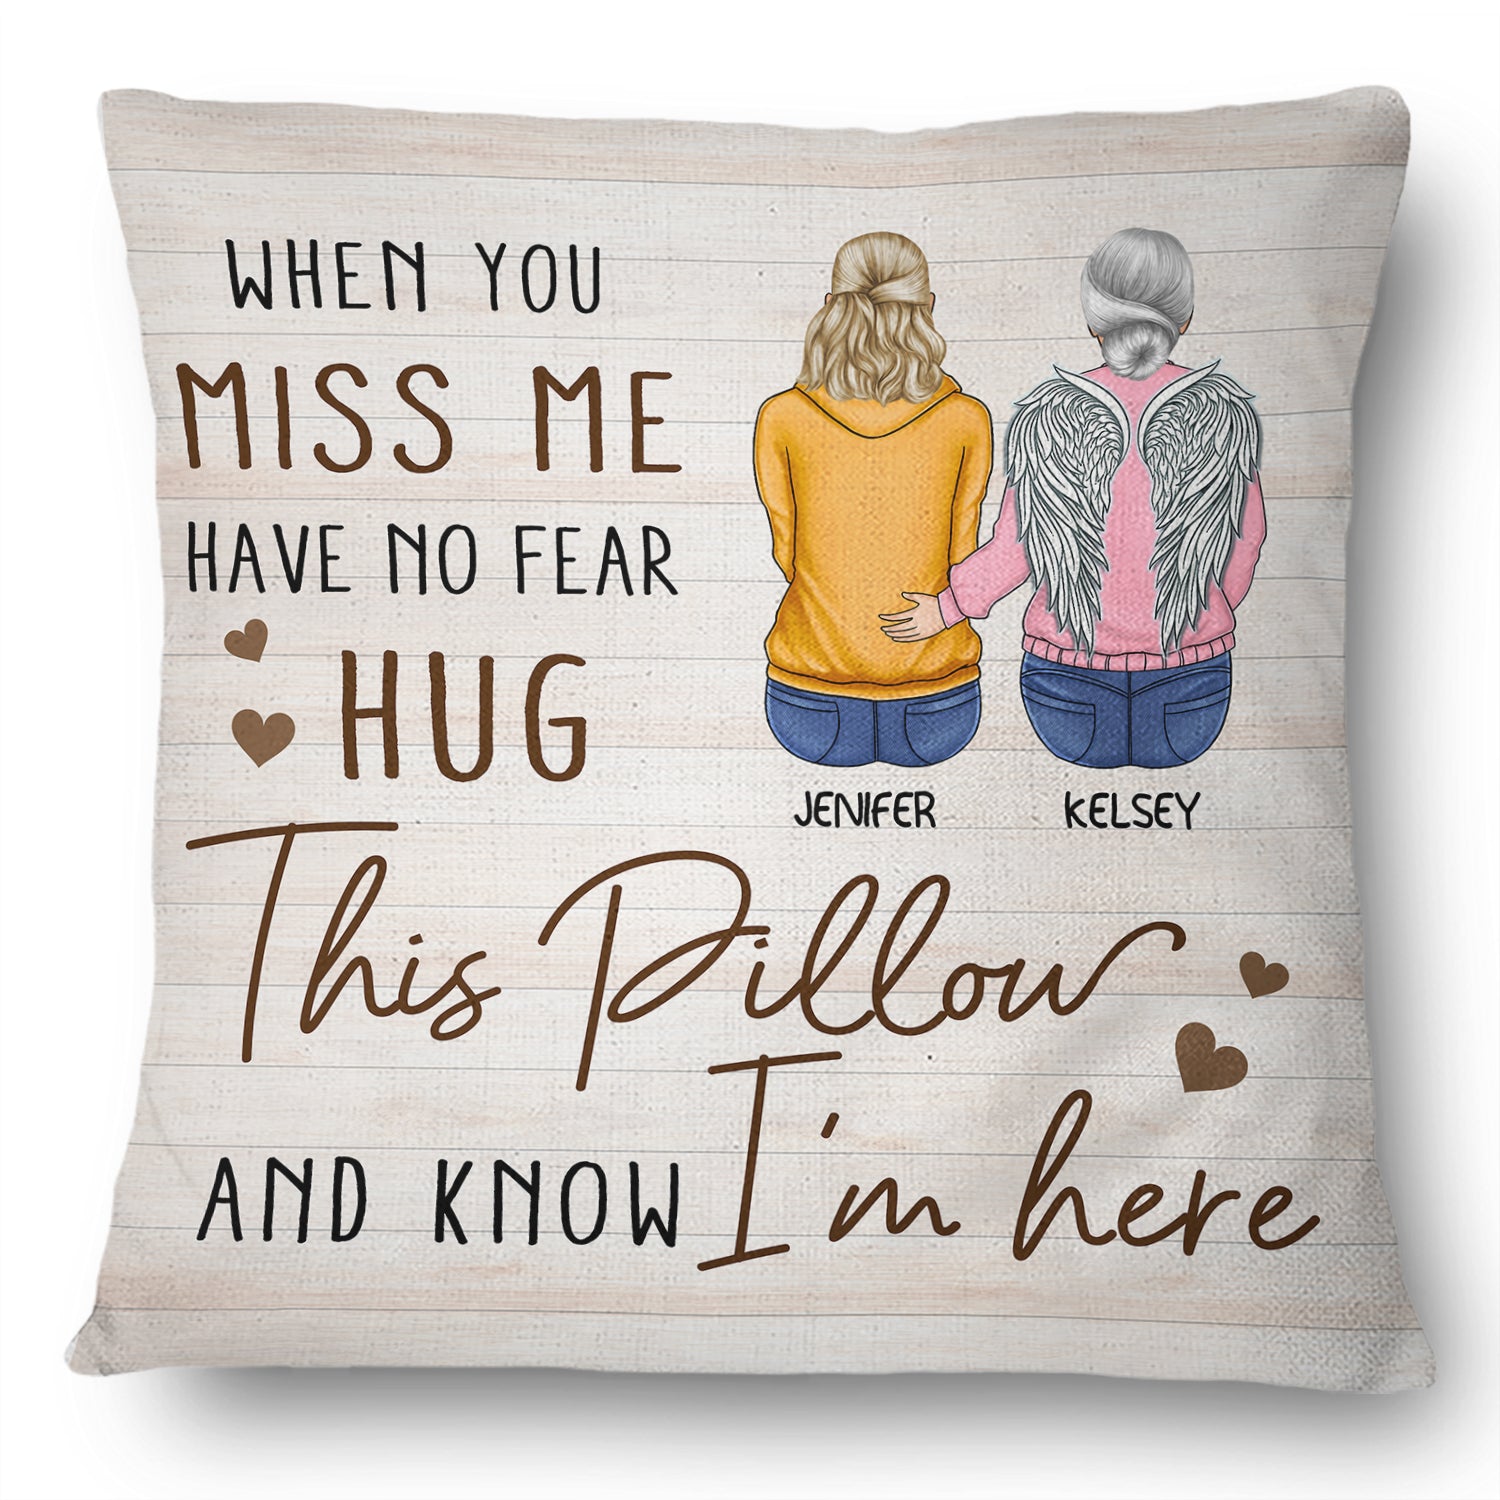 When You Miss Me - Loving, Memorial Gift For Family, Siblings, Friends - Personalized Pillow